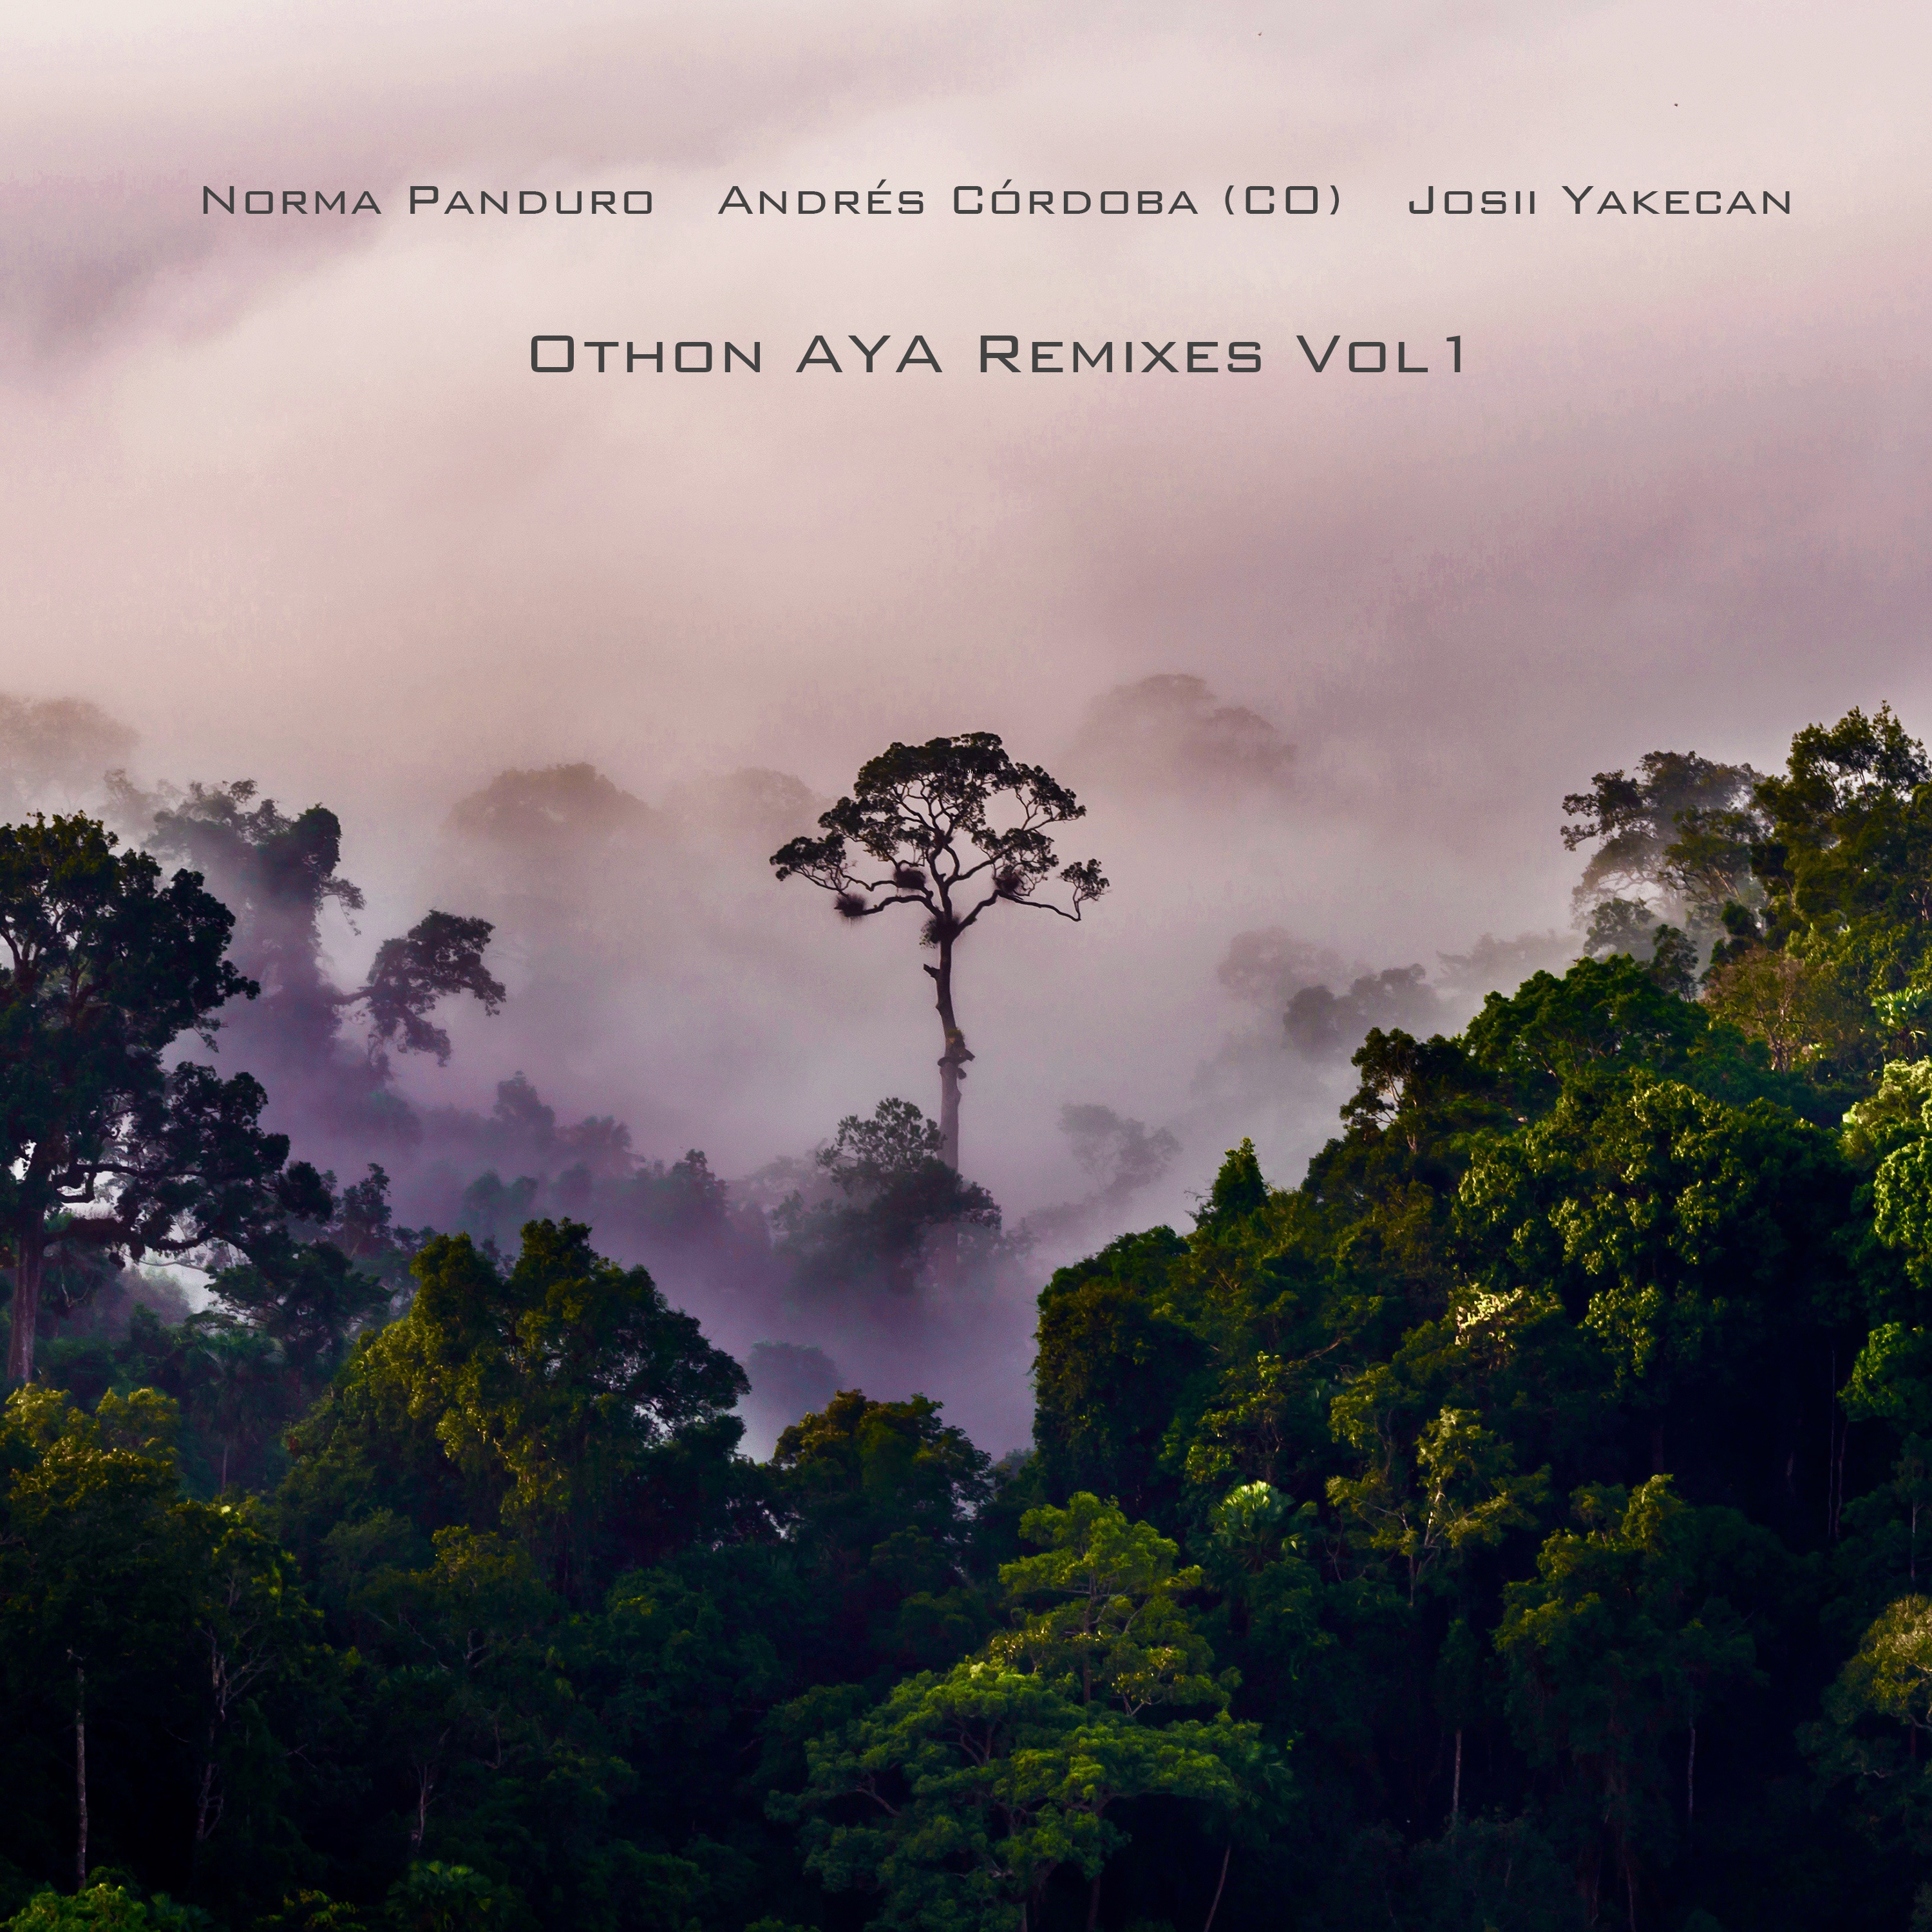 Othon AYA Remixes, Vol 1 to be released Thursday 23 May on Conscious Expansion